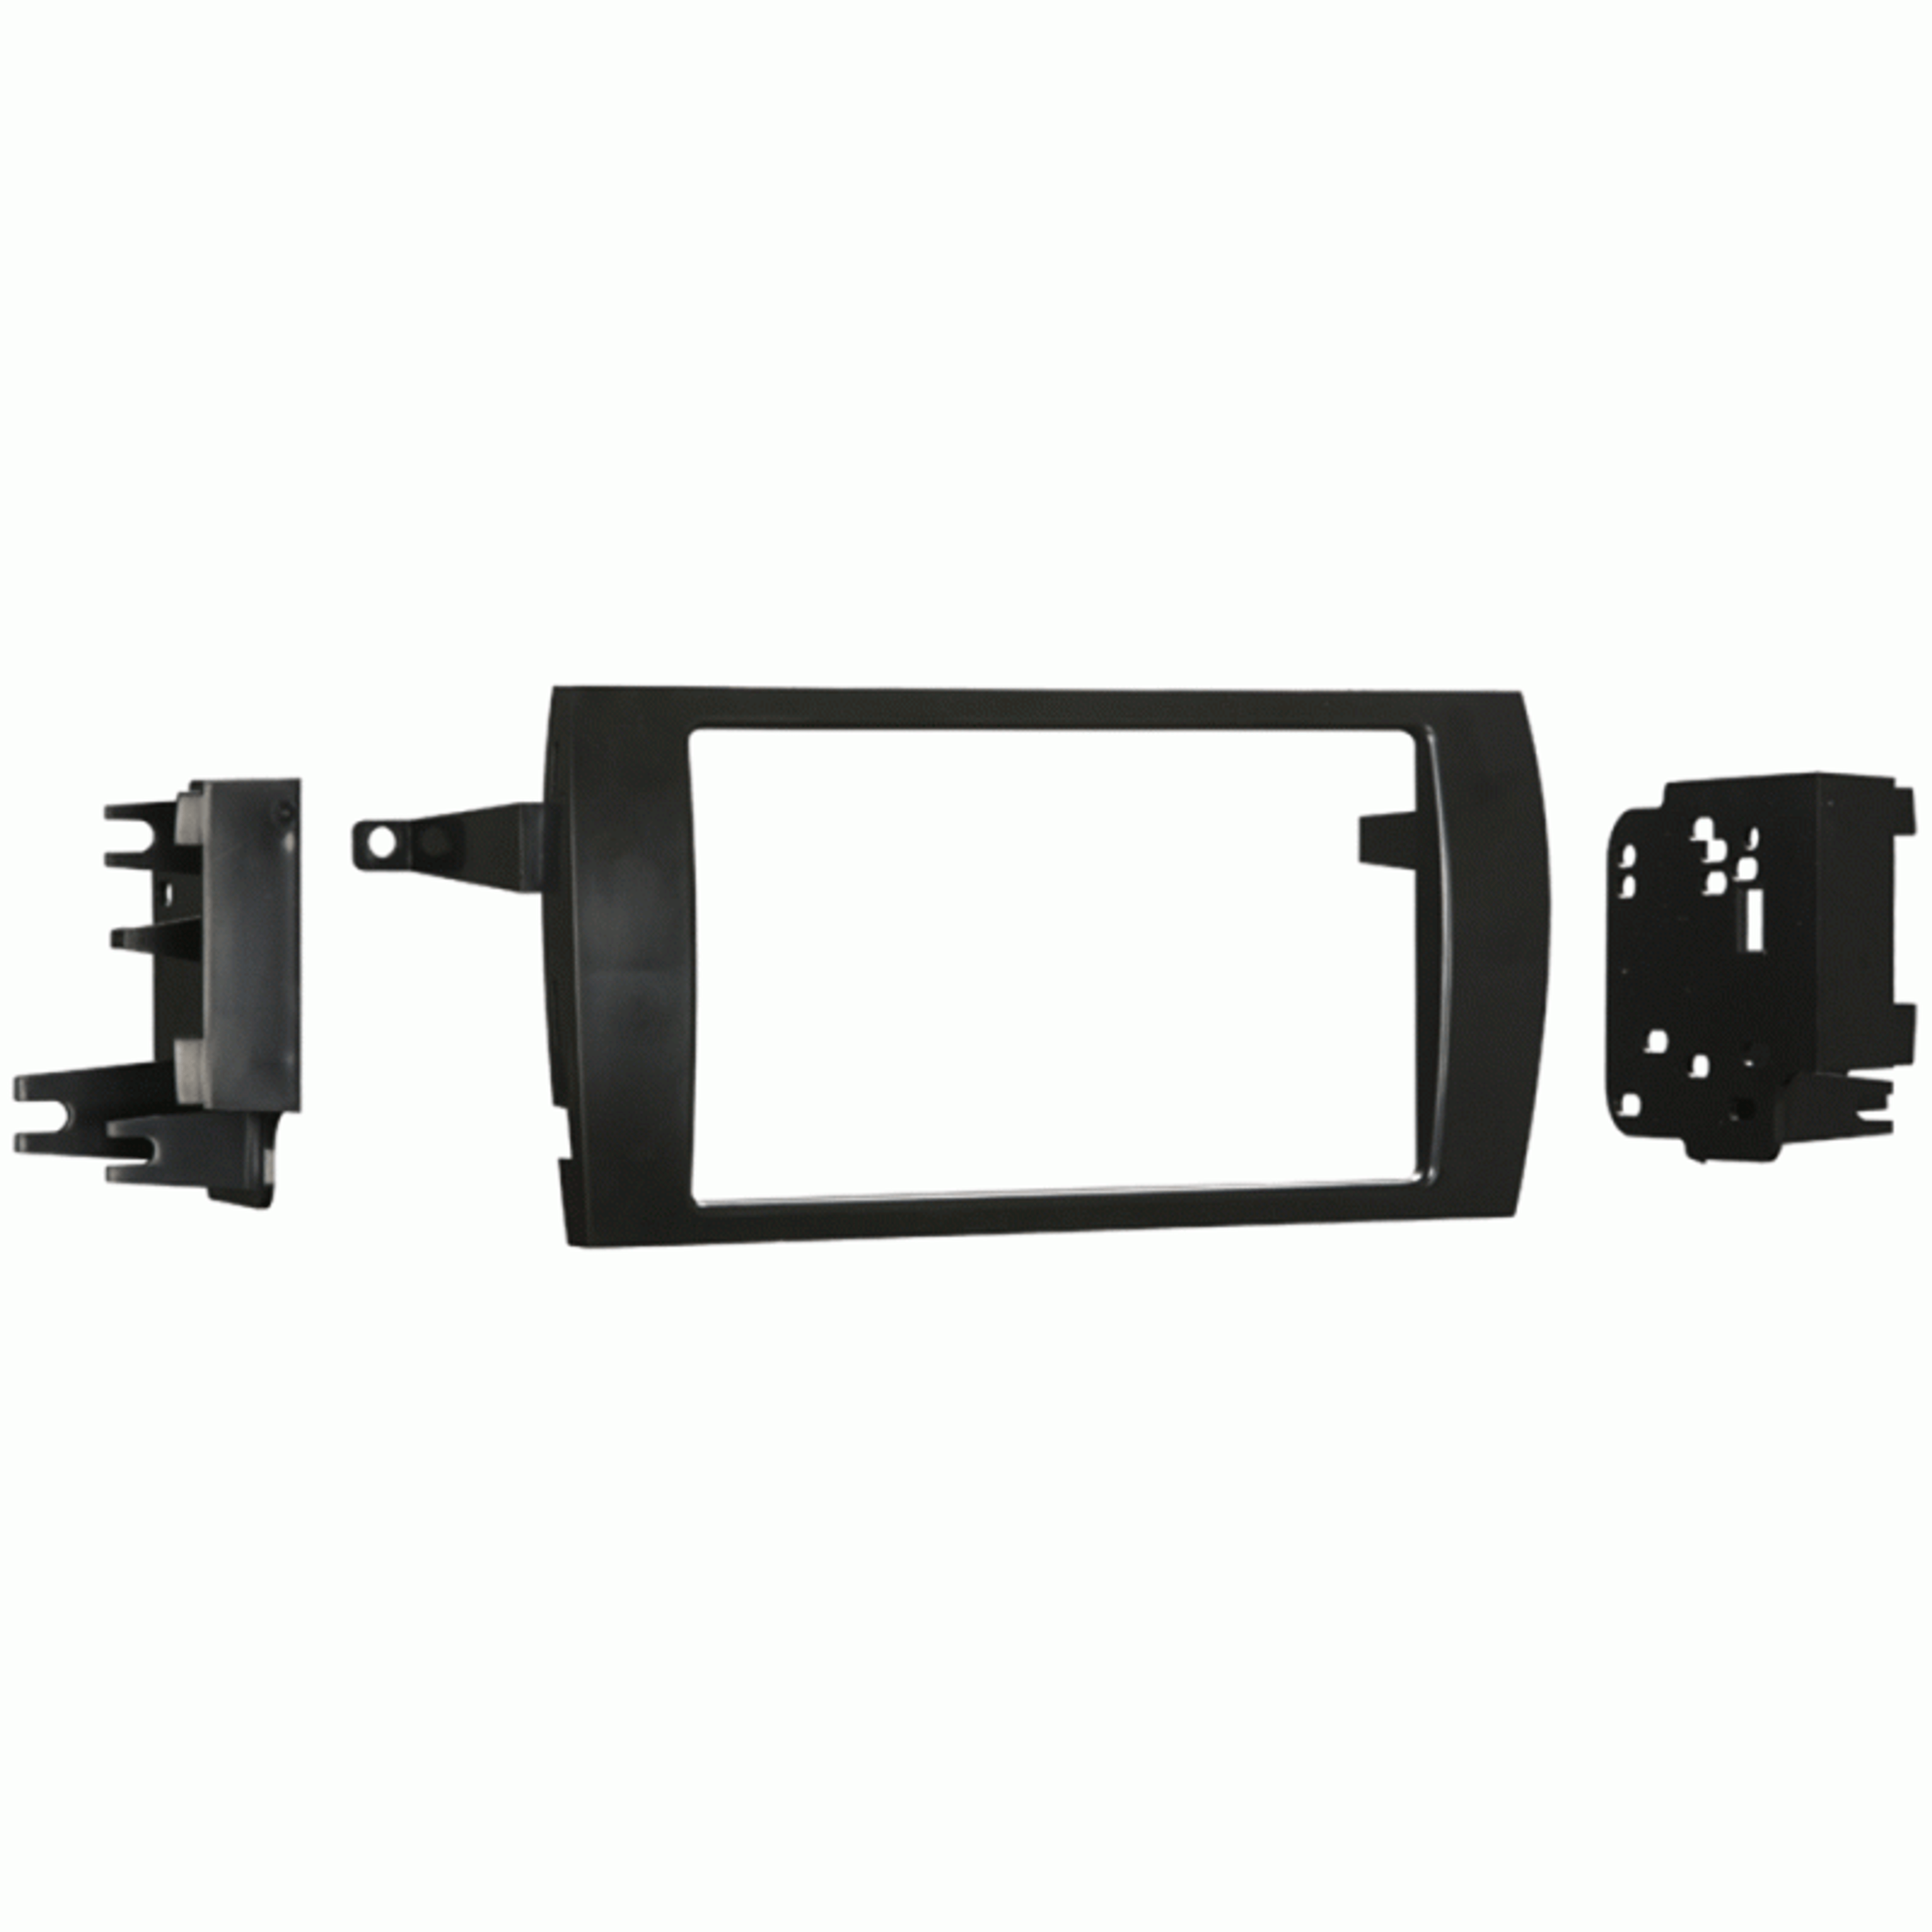 1995 1996 1997 1998 1999 2000 2001 2002 2003 2004 Buick Regal Dash Kit for  Radio Install Double Din 